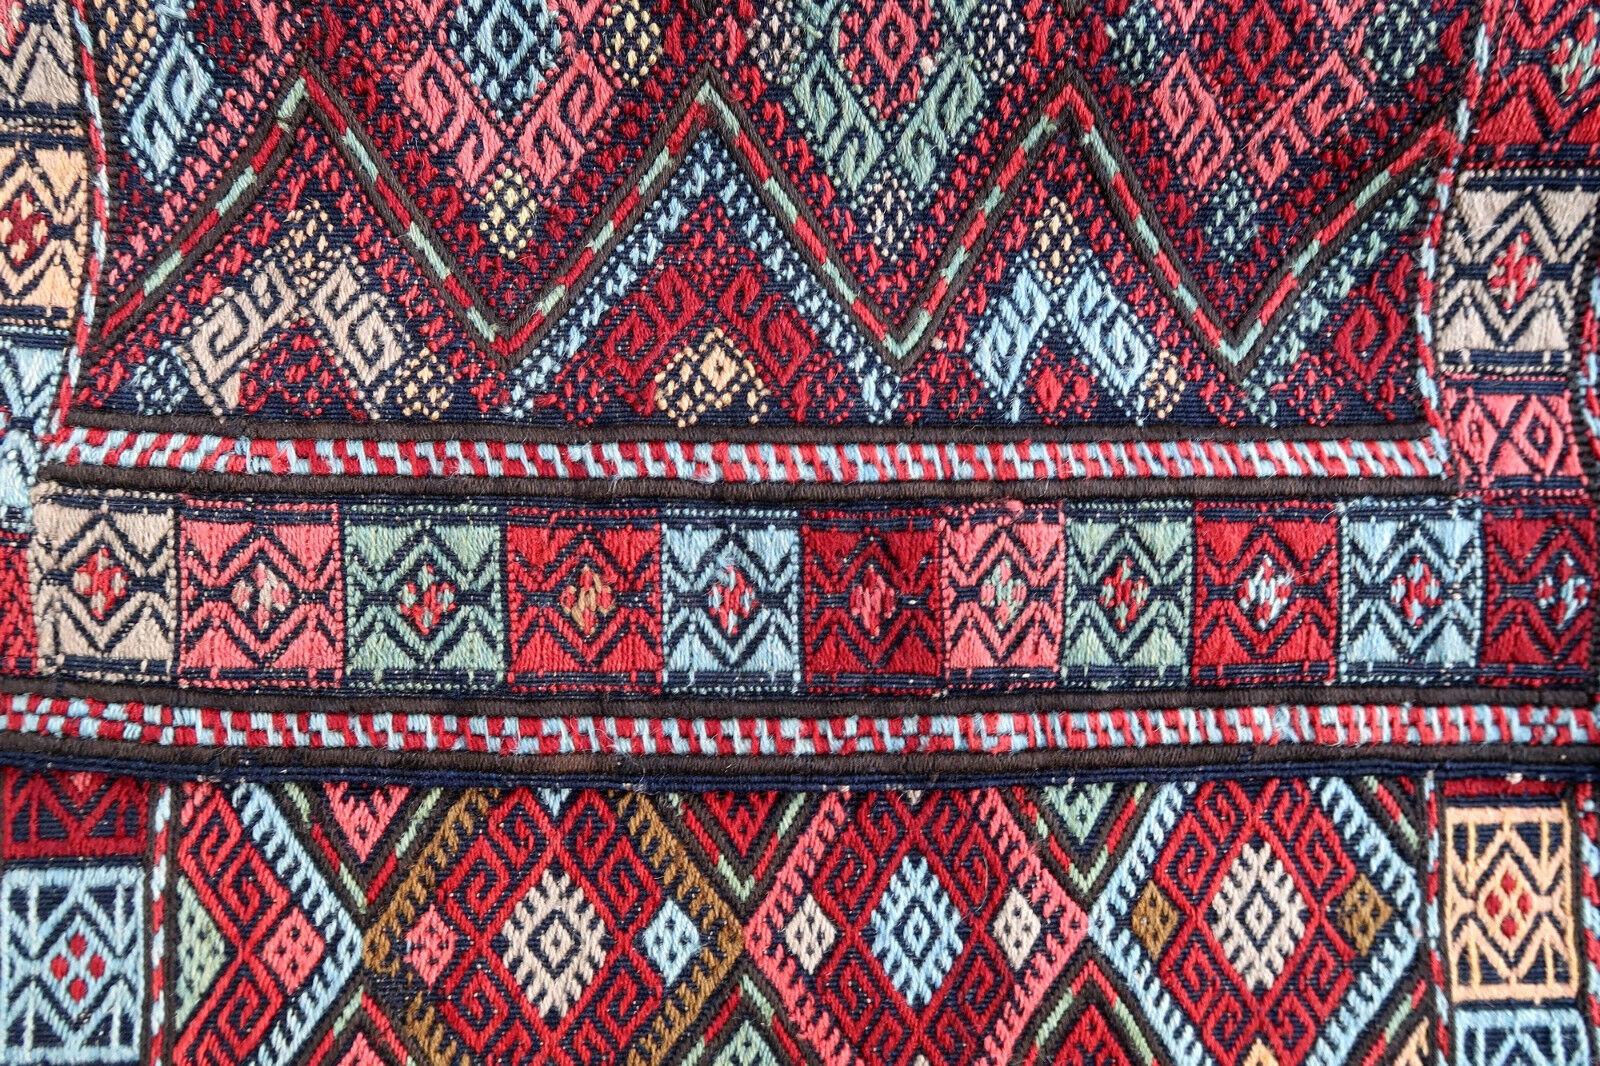 Antique Anatolian bag face from Turkey in Kilim style. The rug is from the beginning of 20th century in original good condition.

- Condition: Original good,

- circa 1900s,

- Size: 1.8' x 3.5' (56cm x 106cm),

- Material: Wool,

-